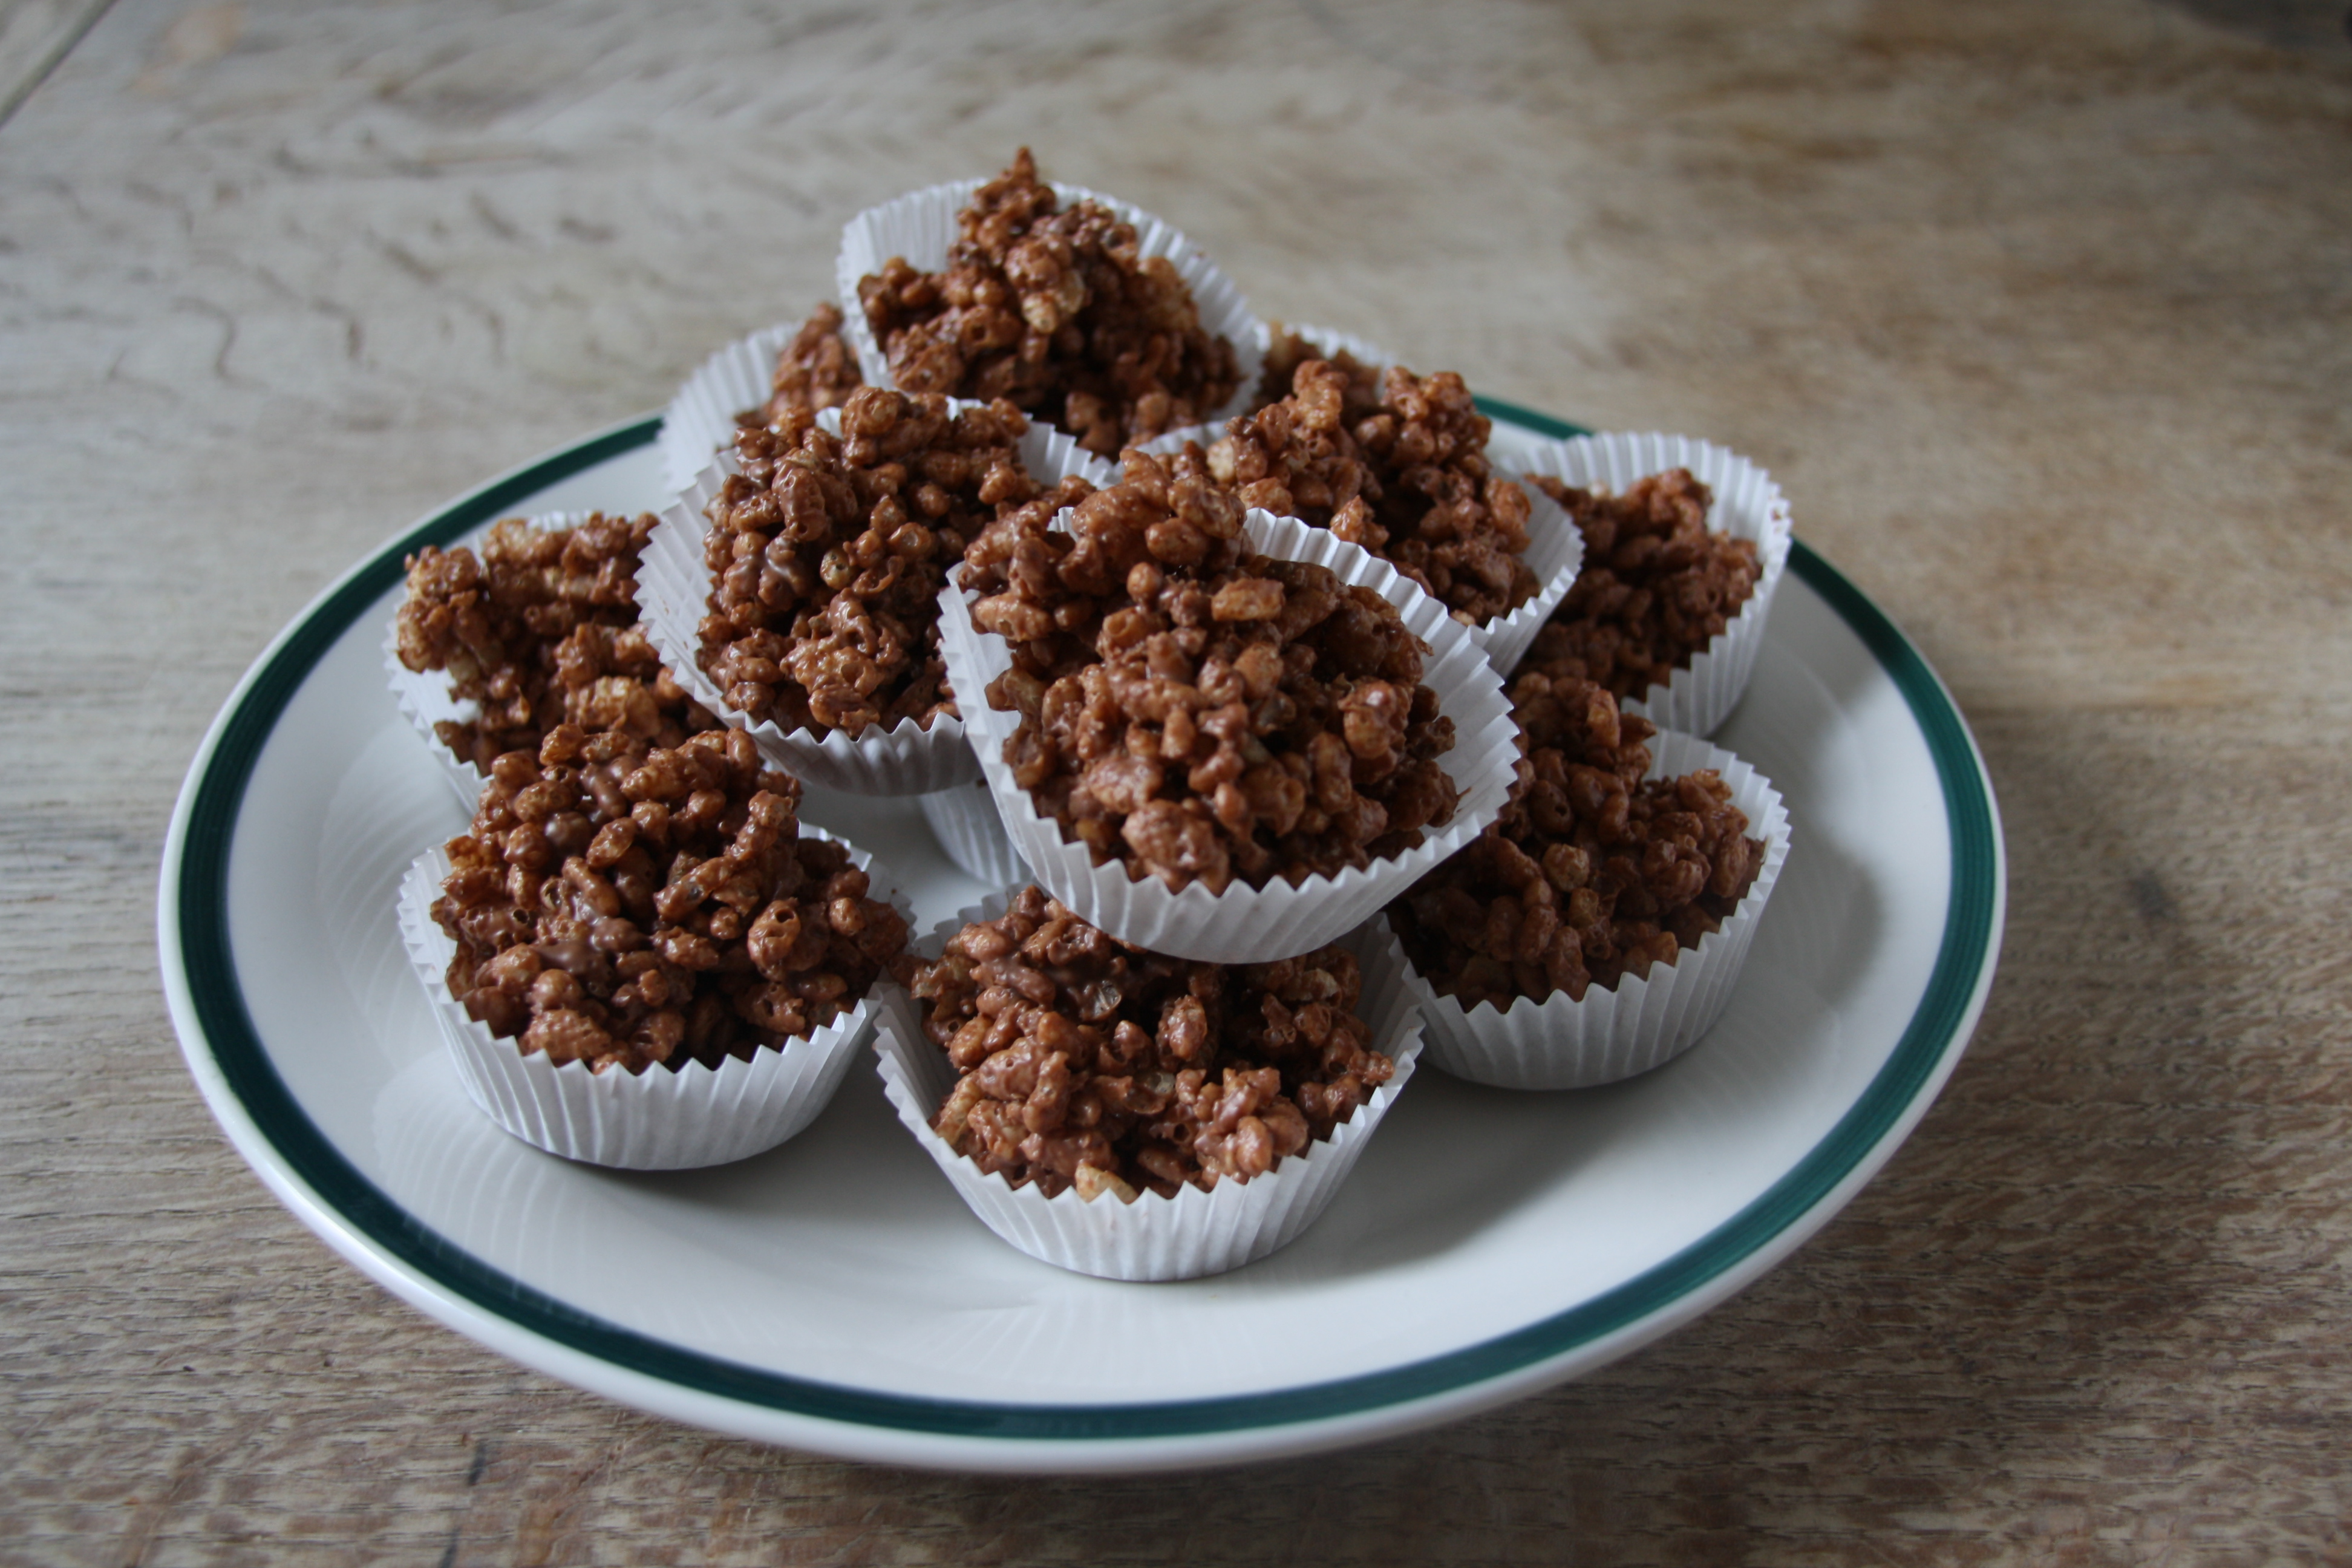 Melted baking chocolate, mixed with Kellogg’s Rice Krispies (once you’d rem...